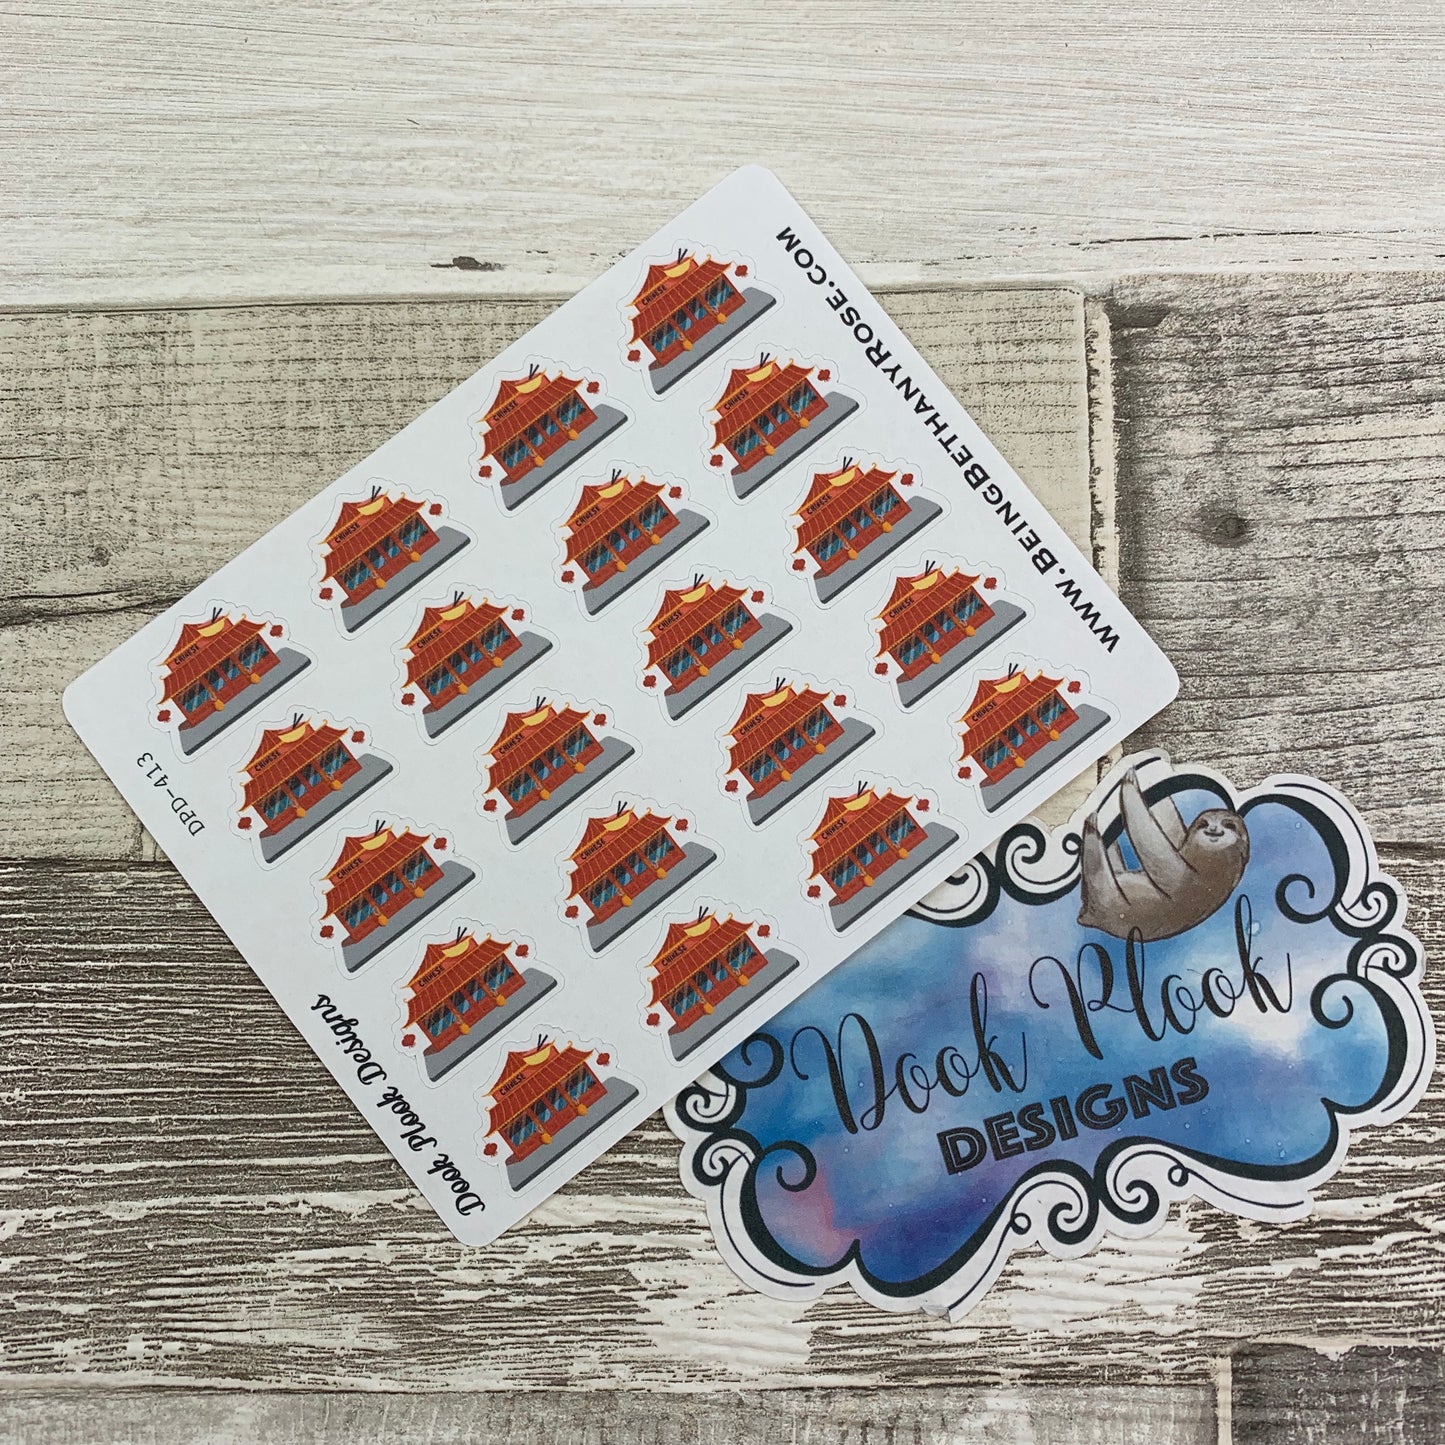 Chinese Takeaway Stickers (DPD413)